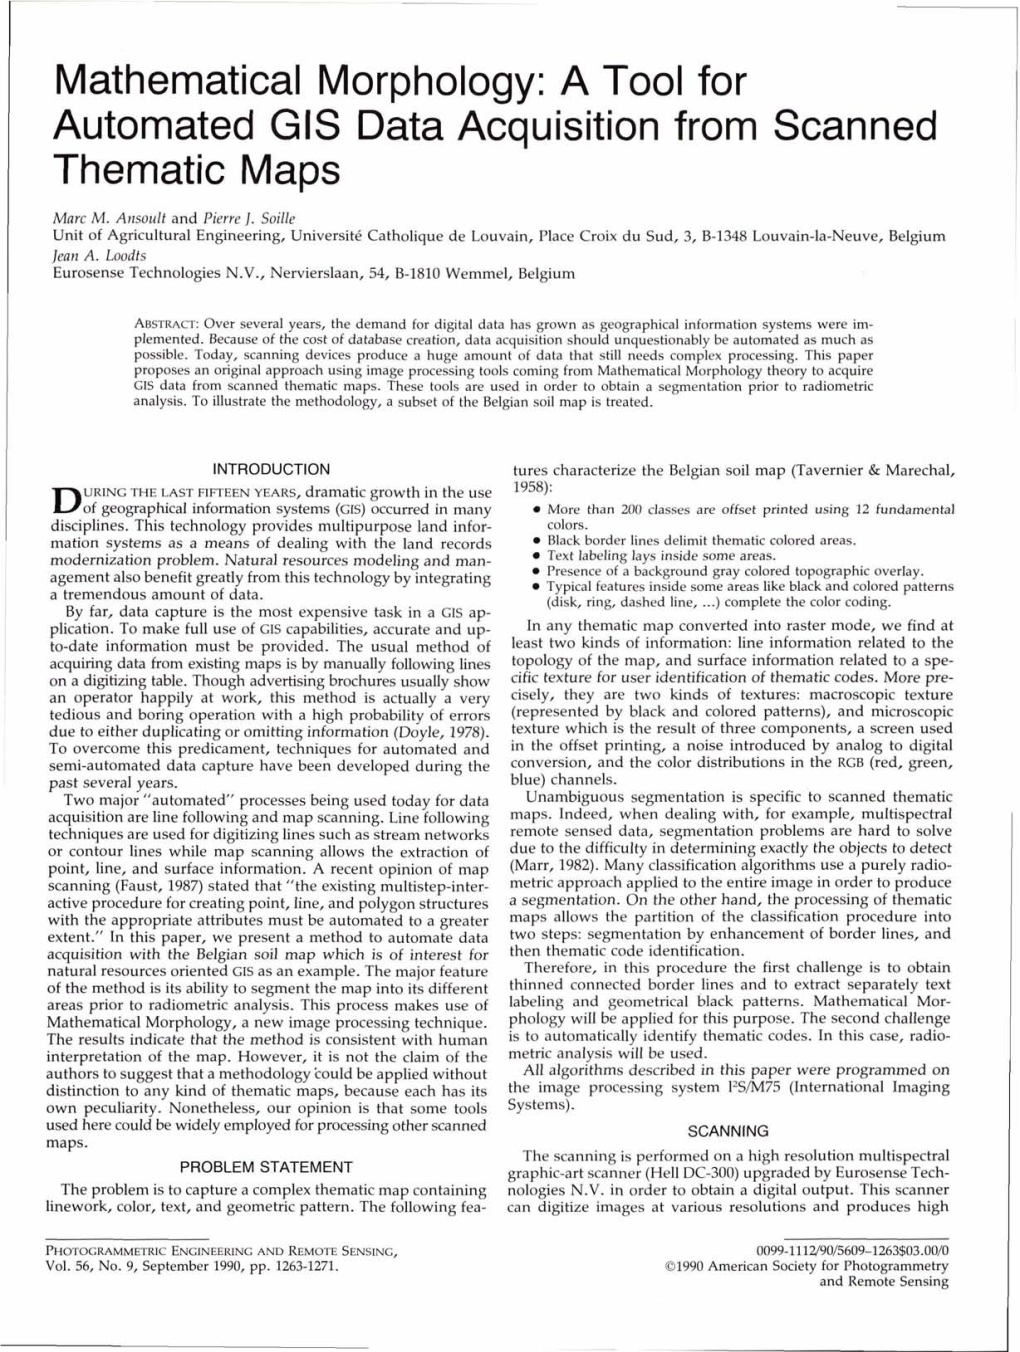 Mathematical Morphology: a Tool for Automated GIS Data Acquisition from Scanned Thematic Maps